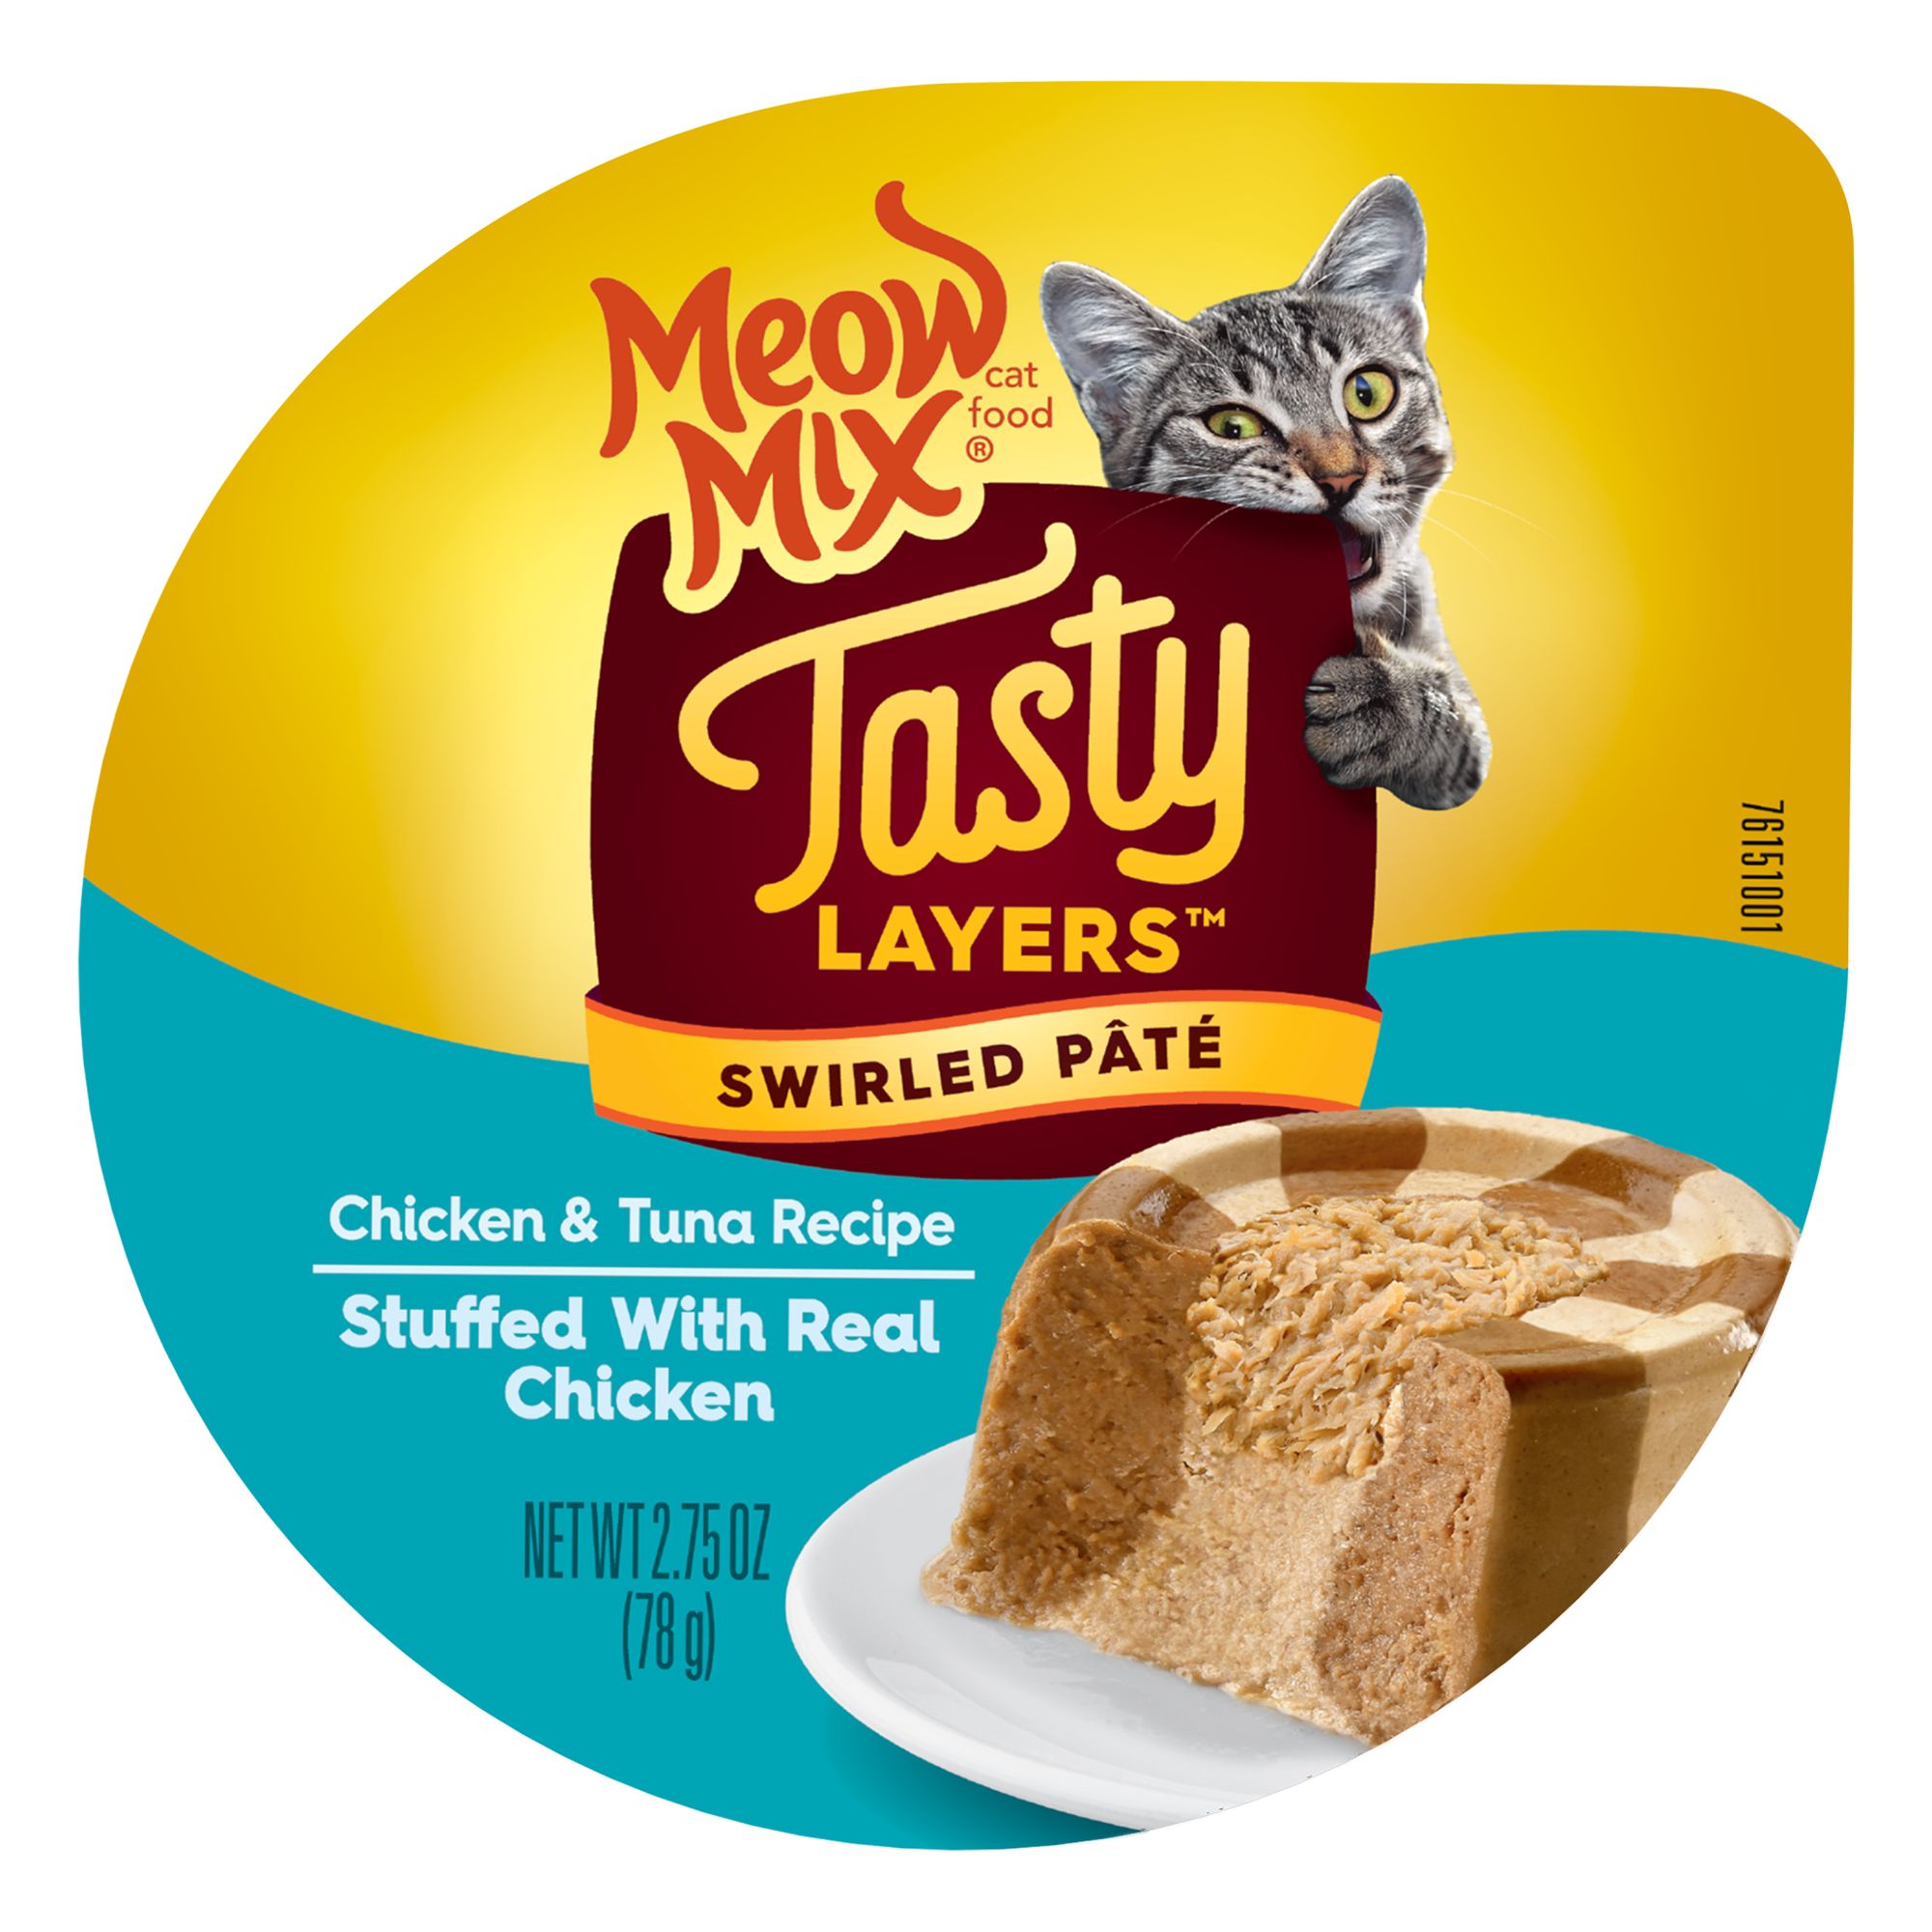 Meow Mix Tasty Layers Wet Cat Food Adult - Chicken, Tuna